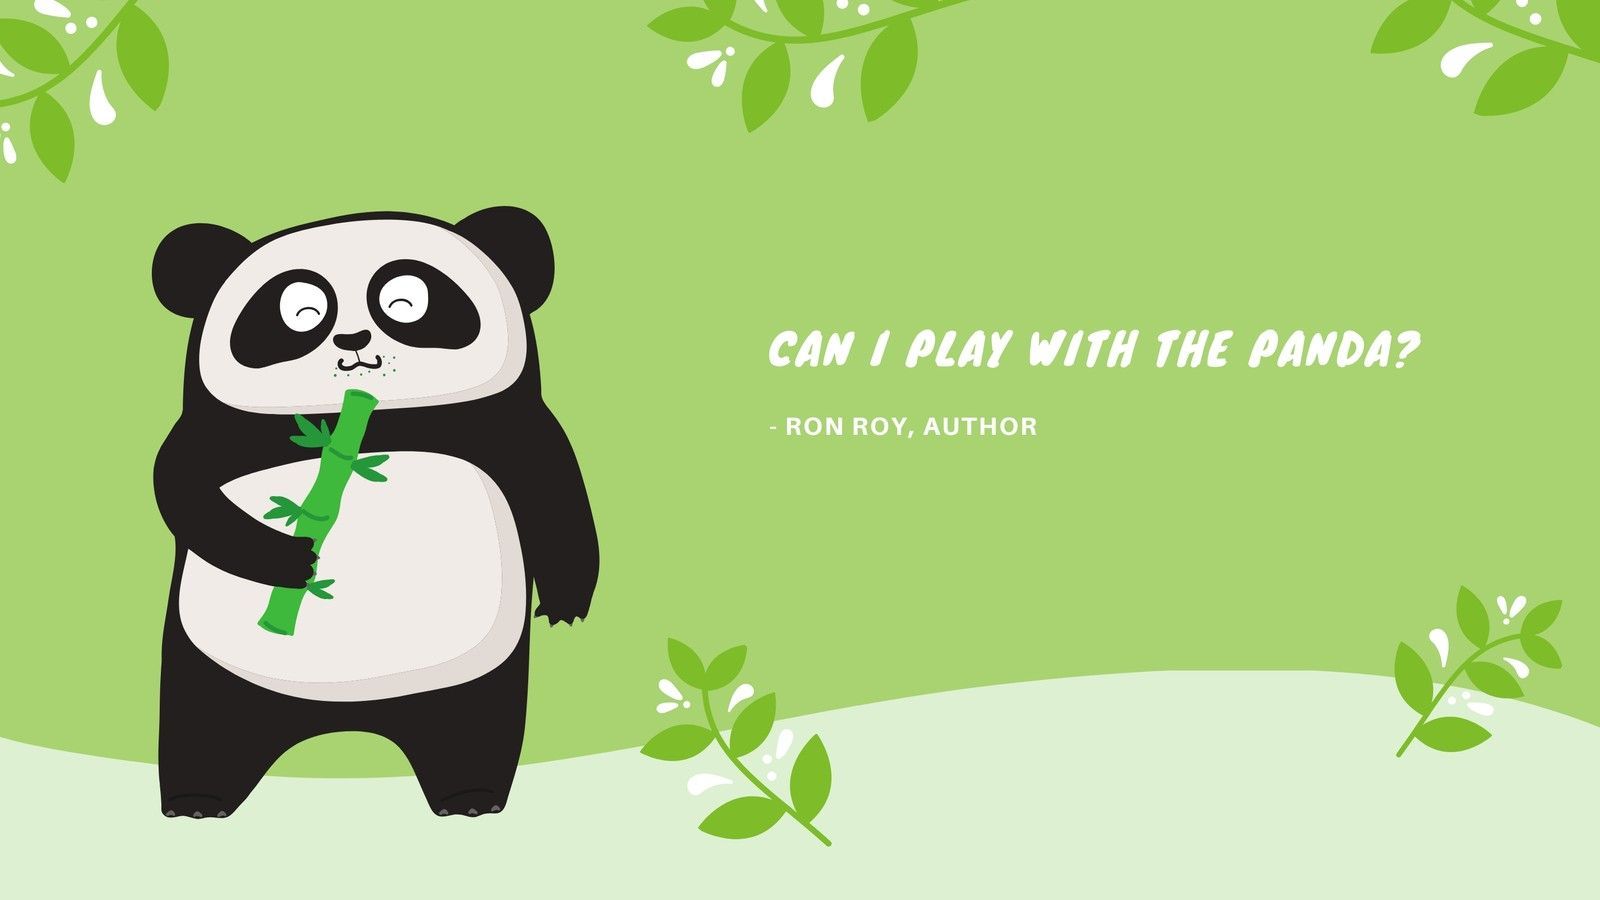 A panda holding onto the green leaves with text that says can play - Panda